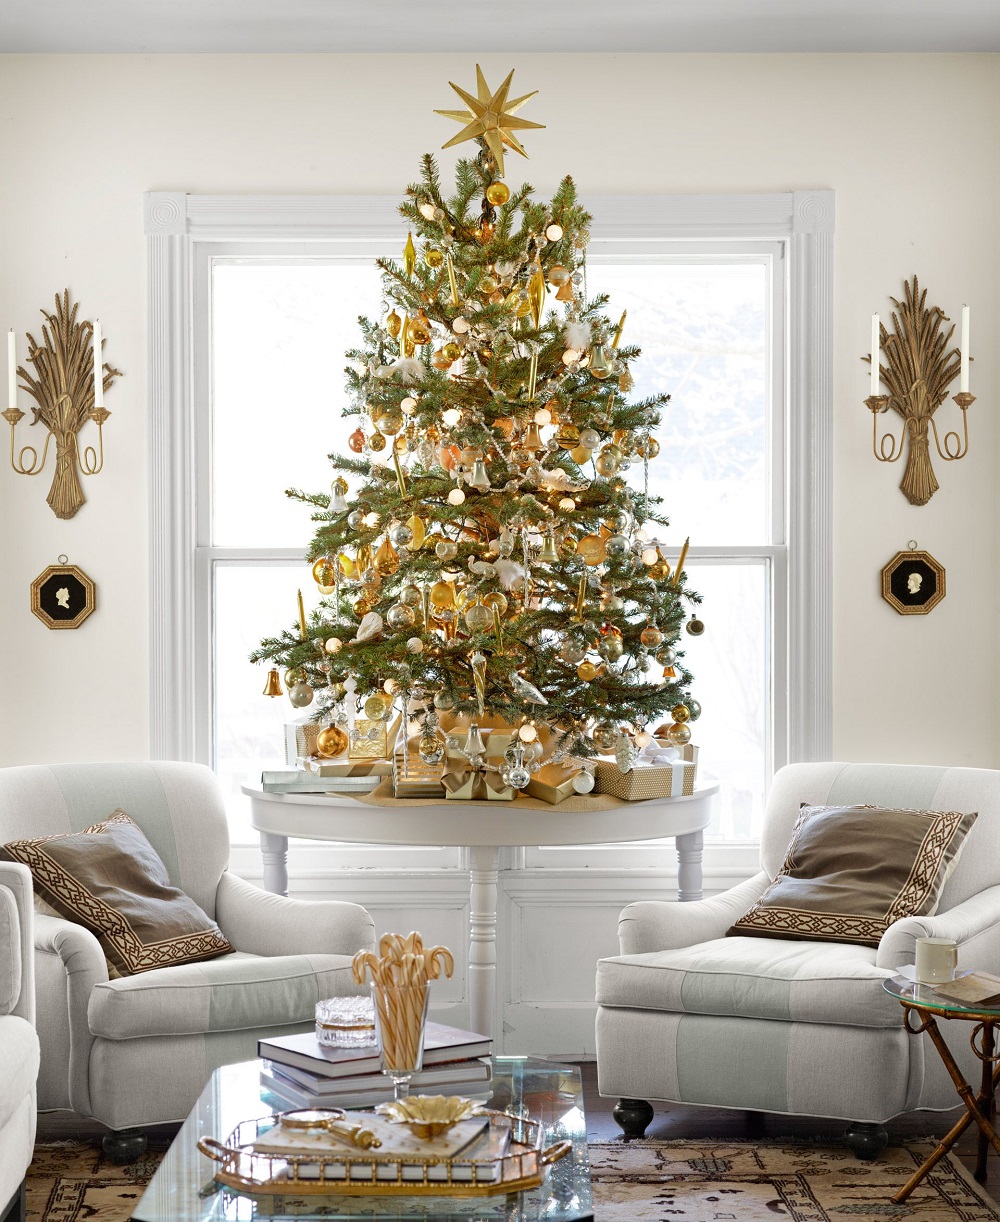 t3-142 Christmas living room decorations you must try in the holiday season